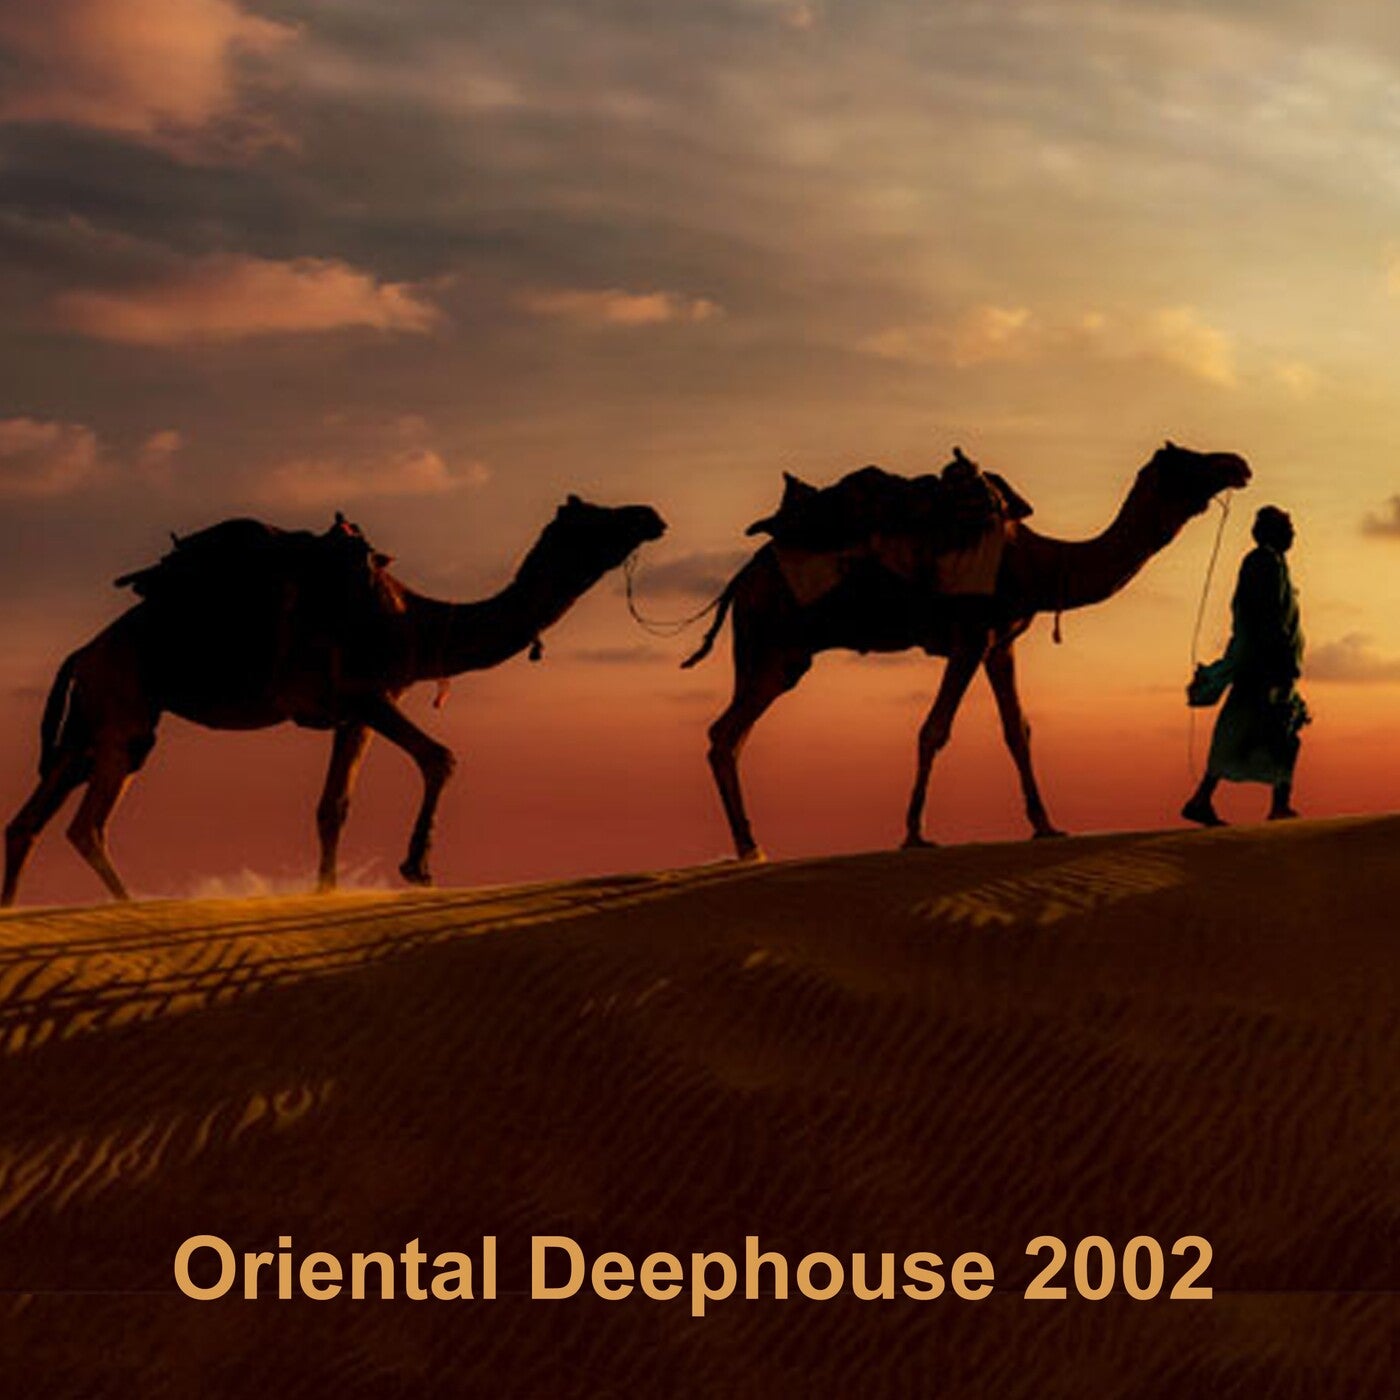 Oriental Deephouse 2002 - The Best Eastern Rhythms, Arabic Electro House, Ethnic Chill House, Oriental & Tribal Ambient